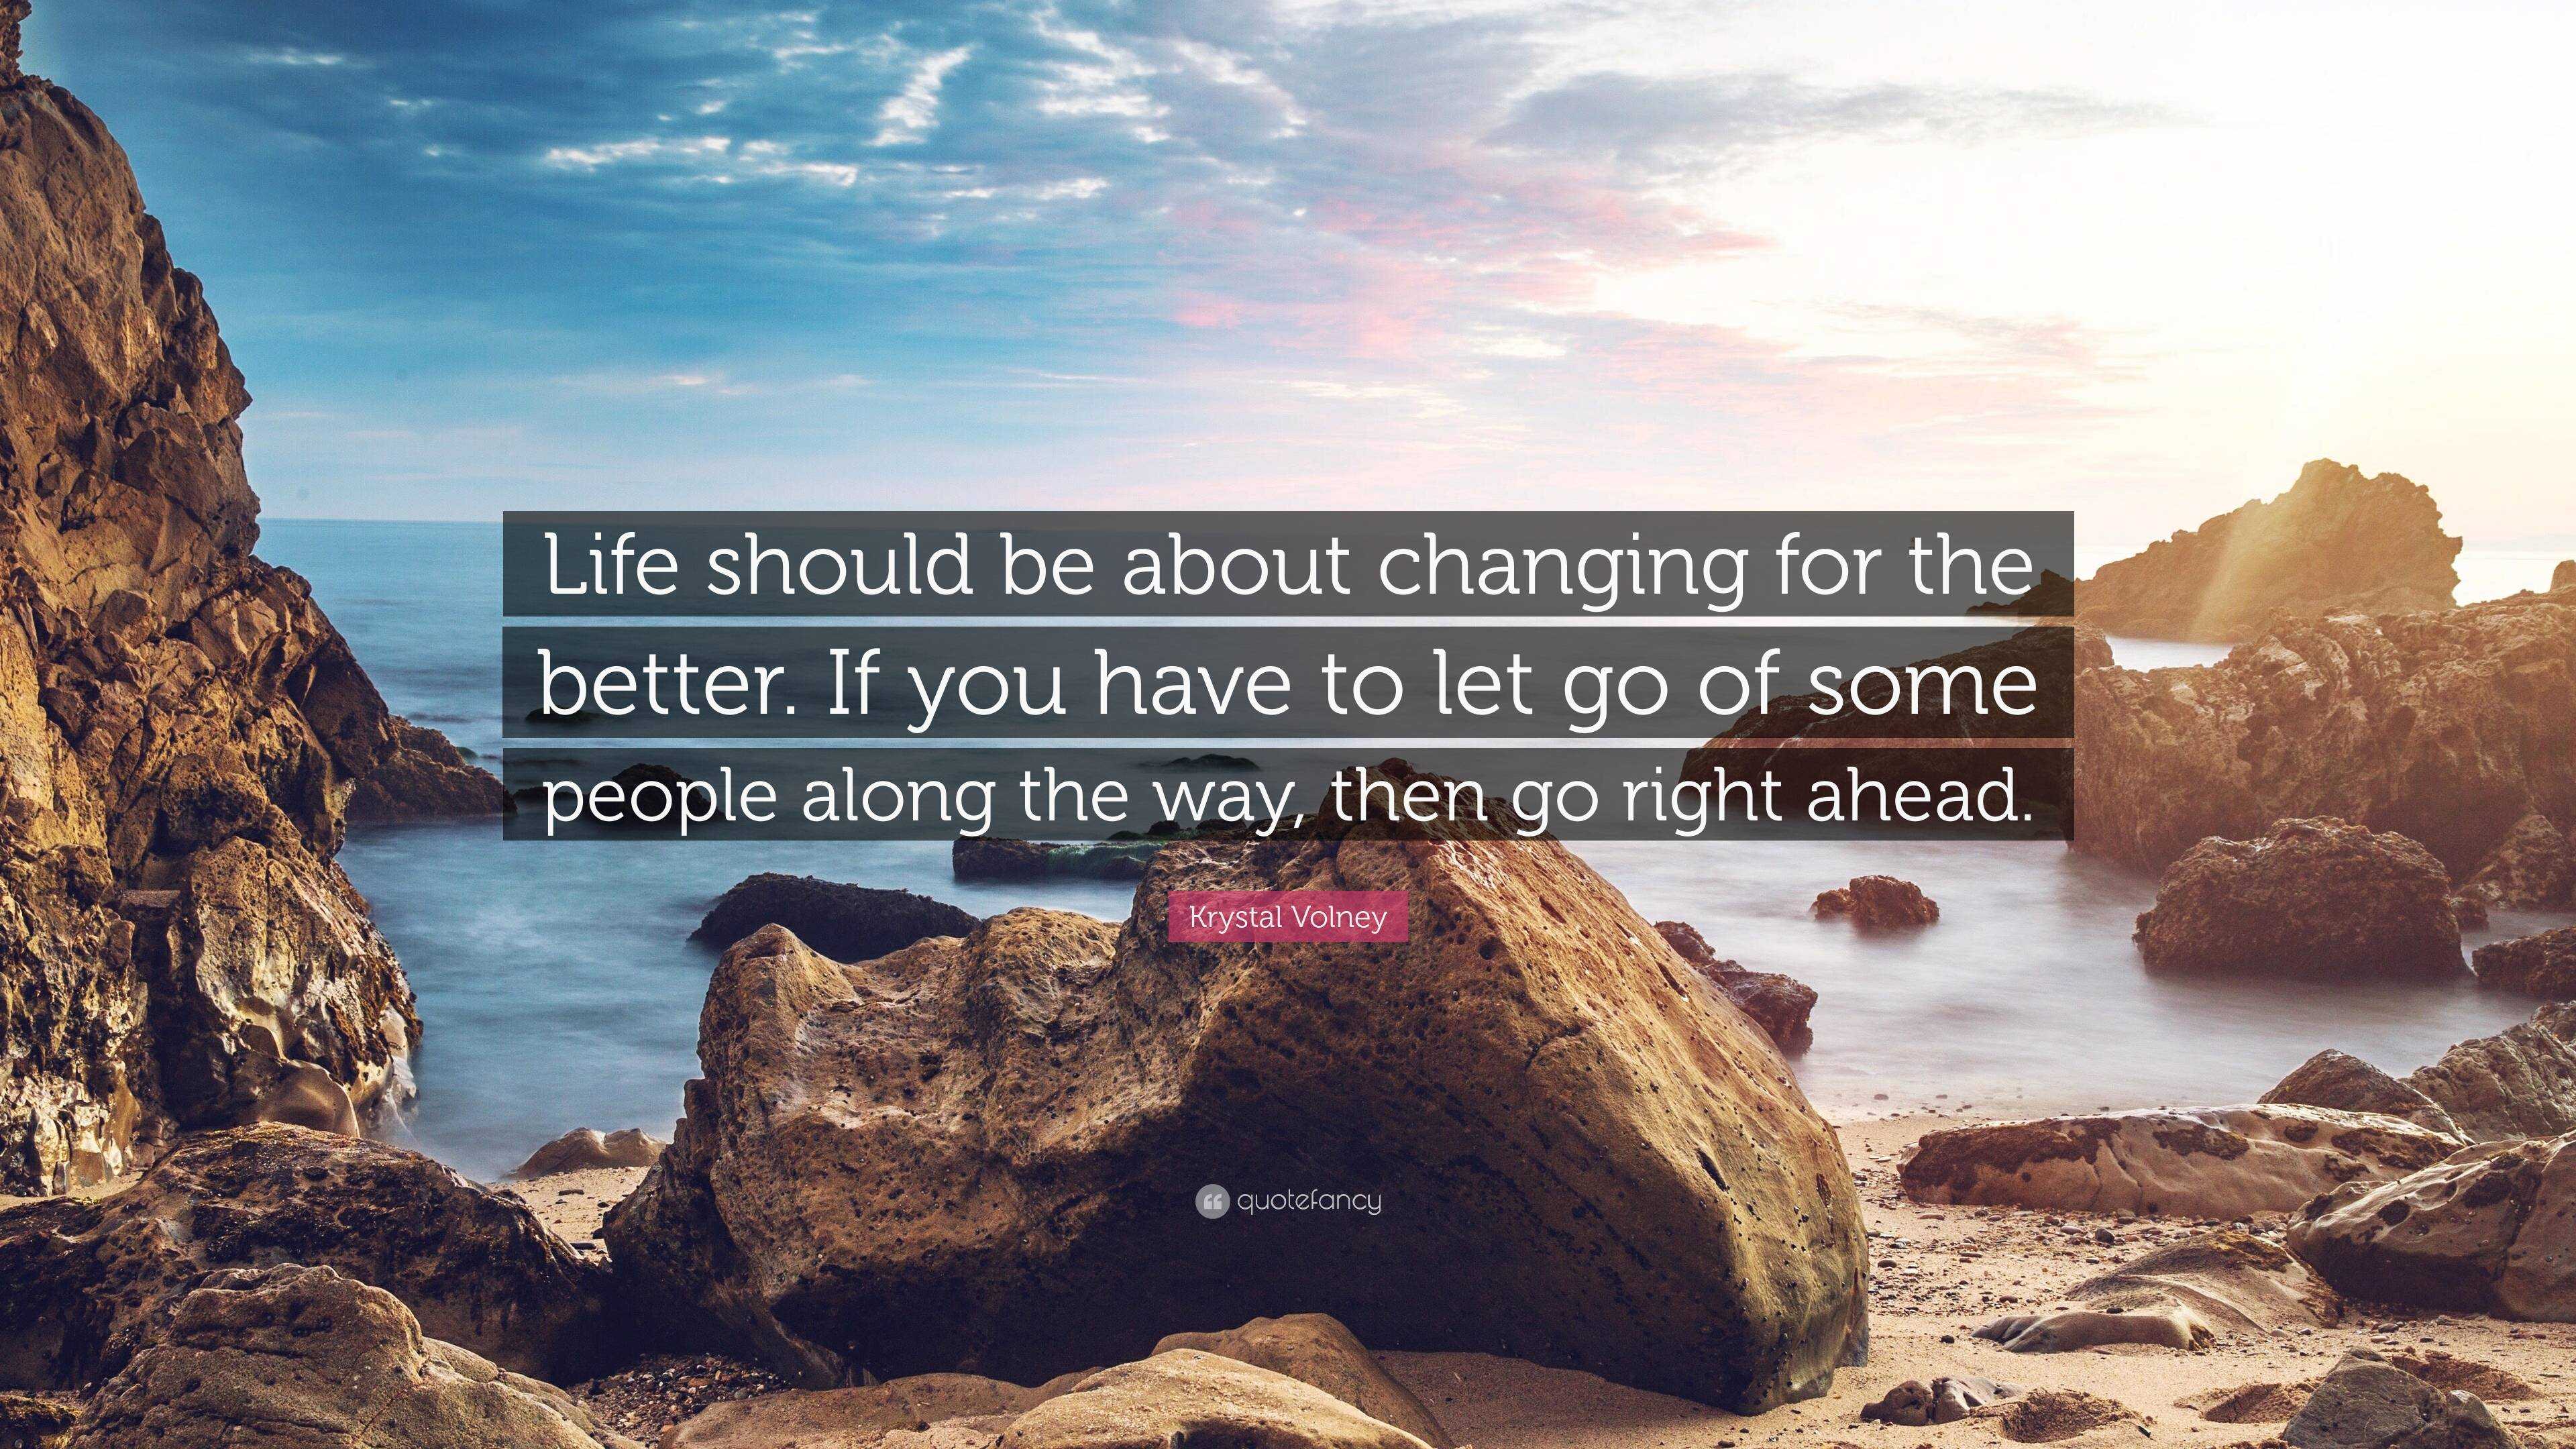 Krystal Volney Quote: “Life should be about changing for the better. If ...